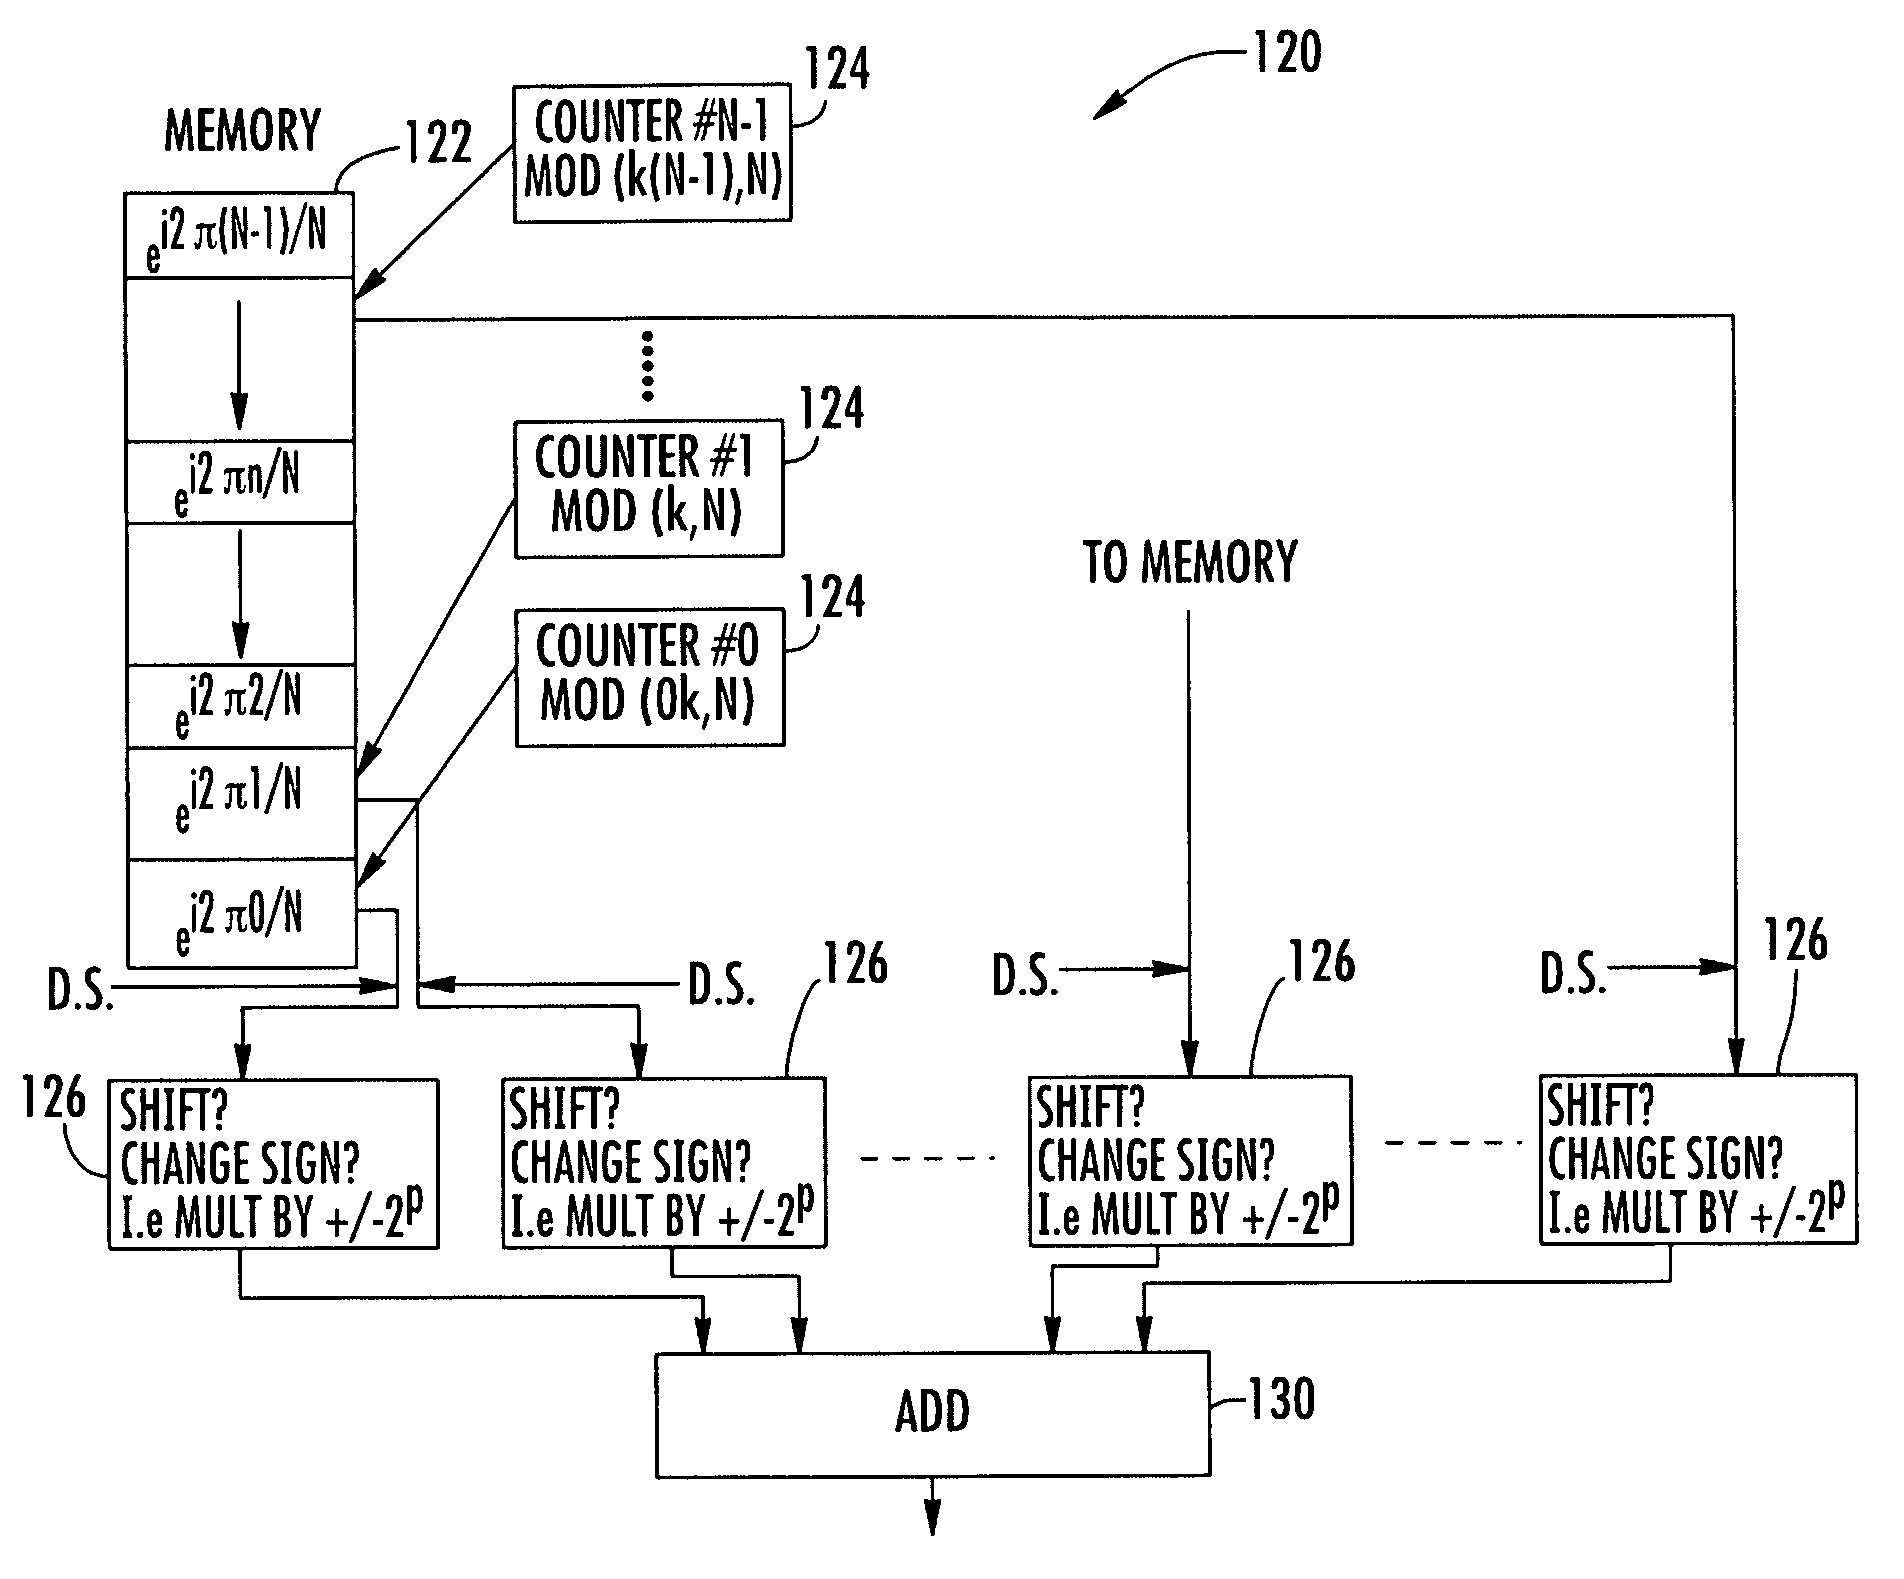 System and method for communicating data using efficient fast fourier transform (FFT) for orthogonal frequency division multiplexing (OFDM) modulation